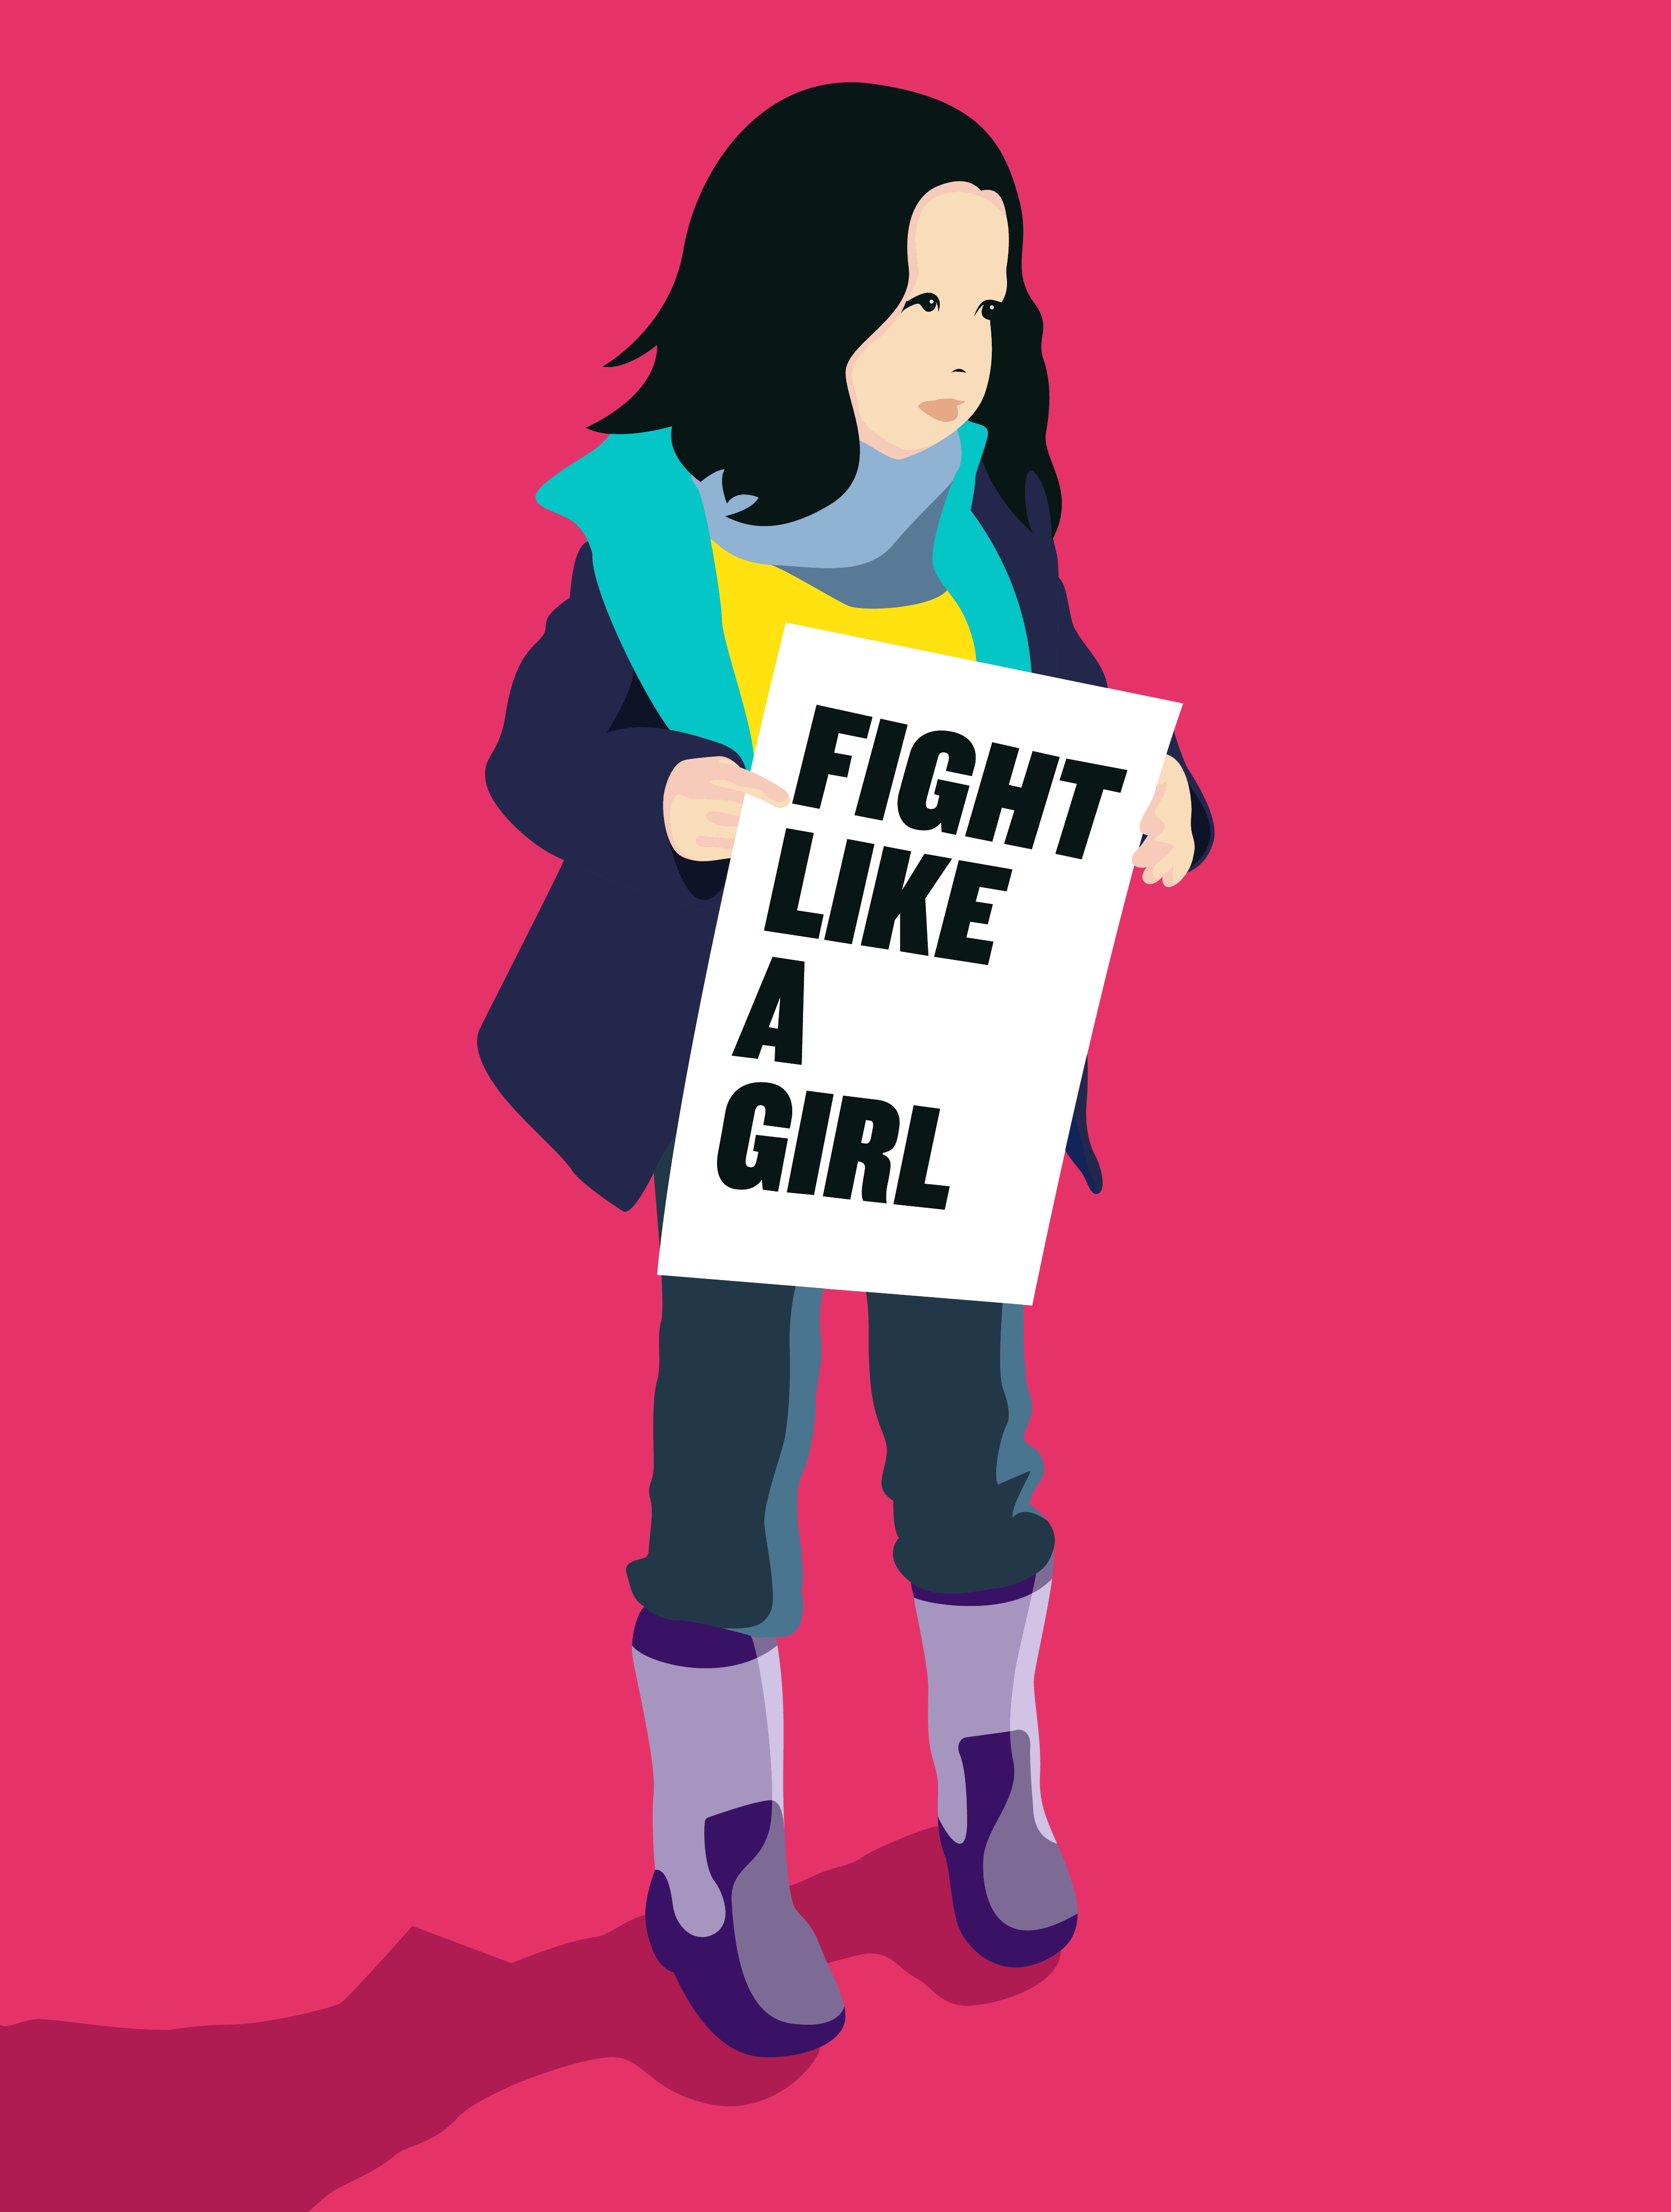 Minimalist vector art illustration of a little girl holding a sign that says 'Fight like a girl' by digital artist Baz Grafton.